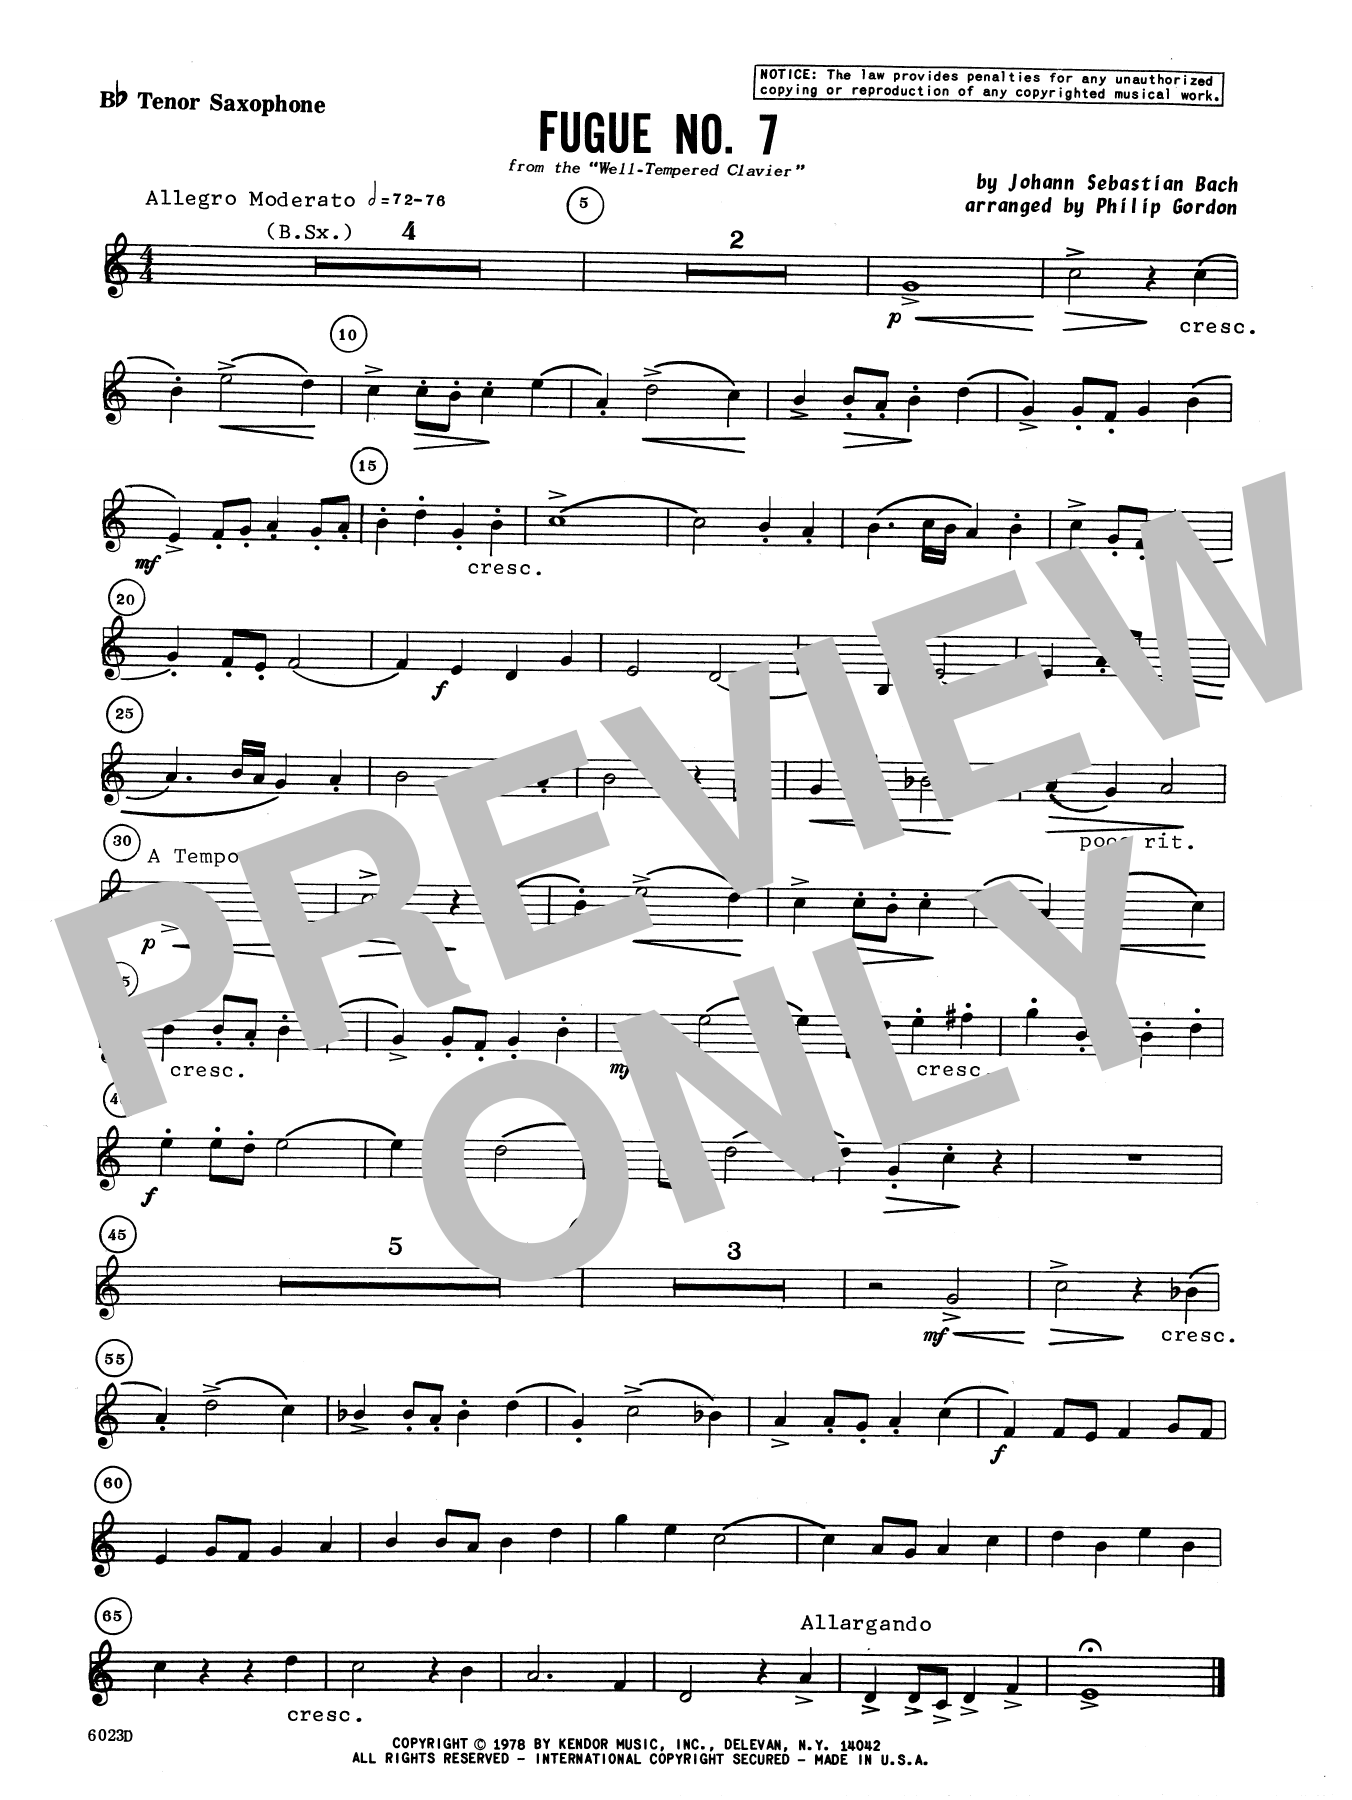 Download Phillip Gordon Fugue No. 7 (from the Well-Tempered Cla Sheet Music